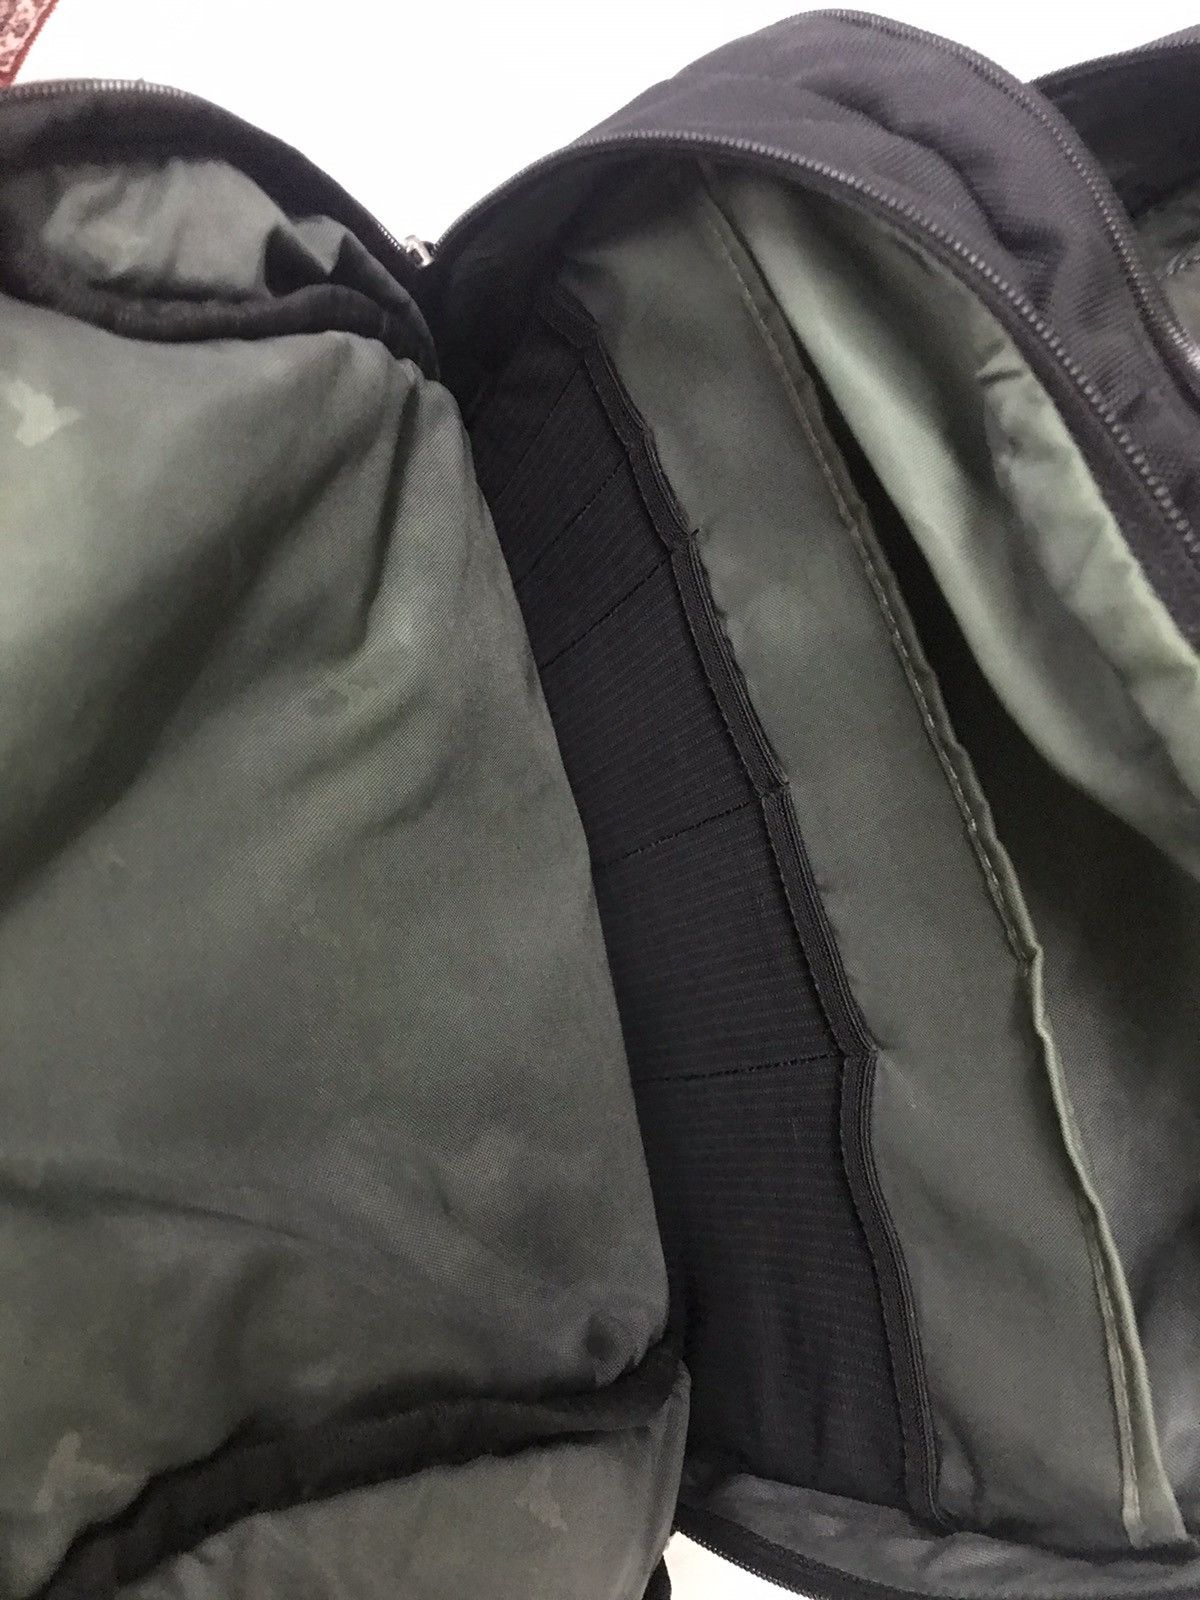 Authentic Gregory Laptop Size Backpack - 19